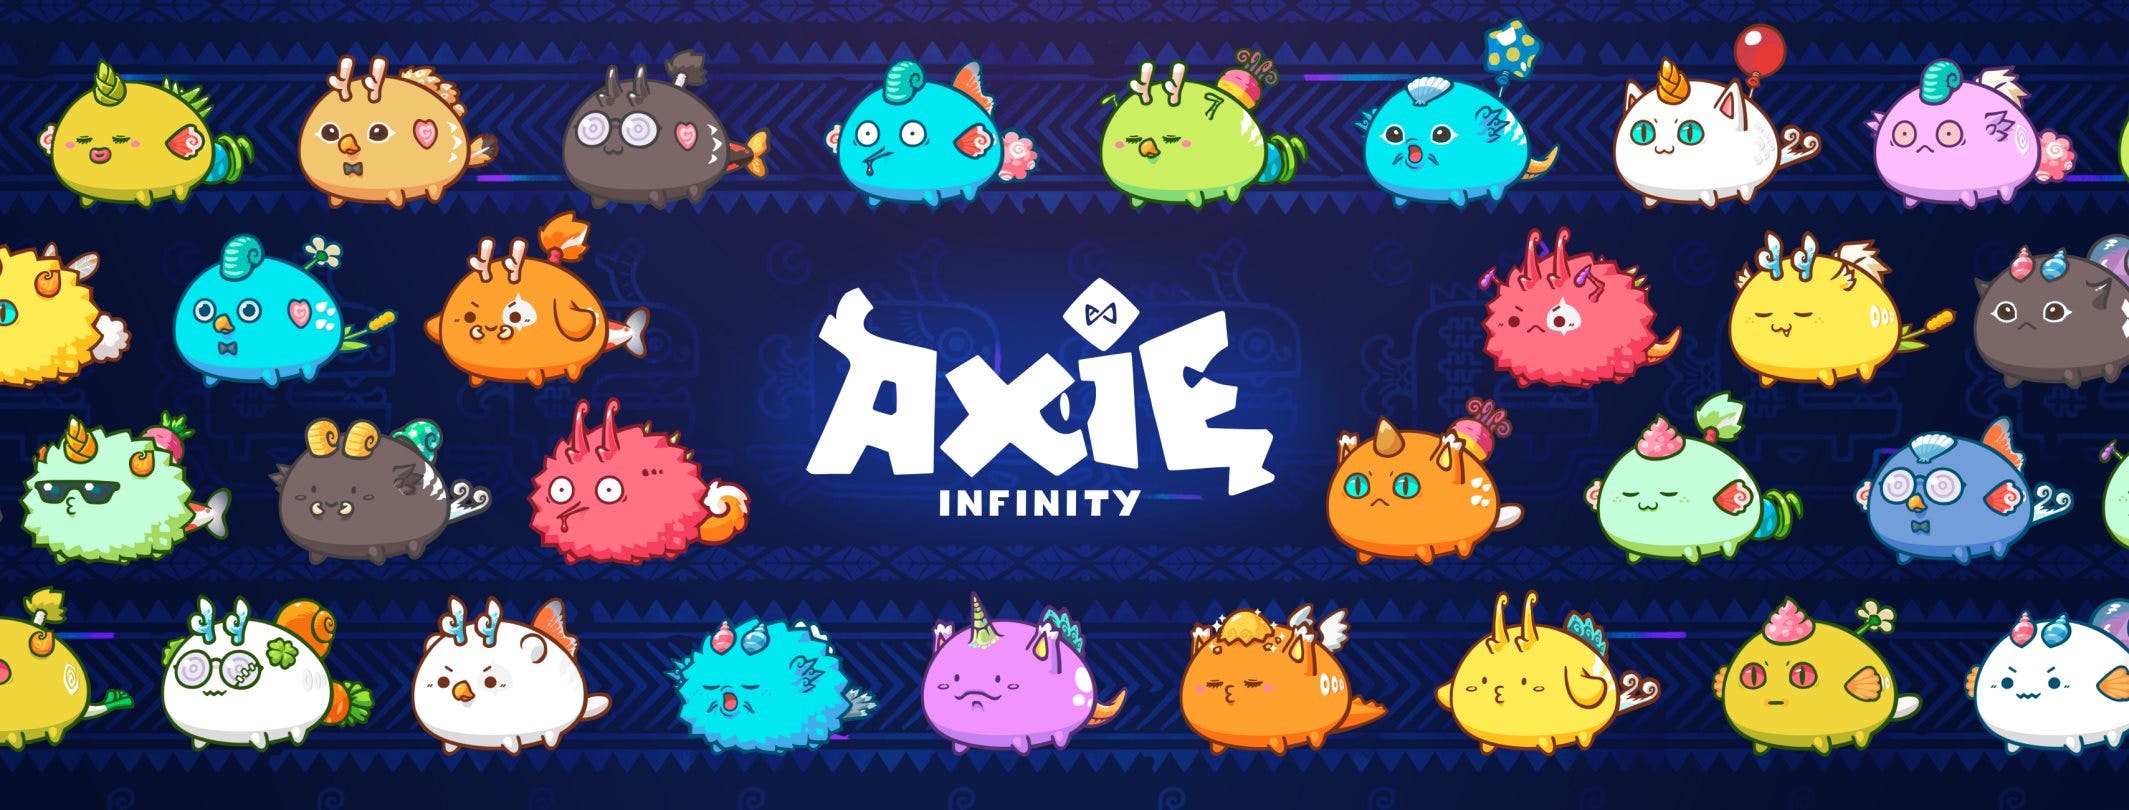 Axie Infinity Passes $2B In Sales Volume: What To Know About The Top NFT